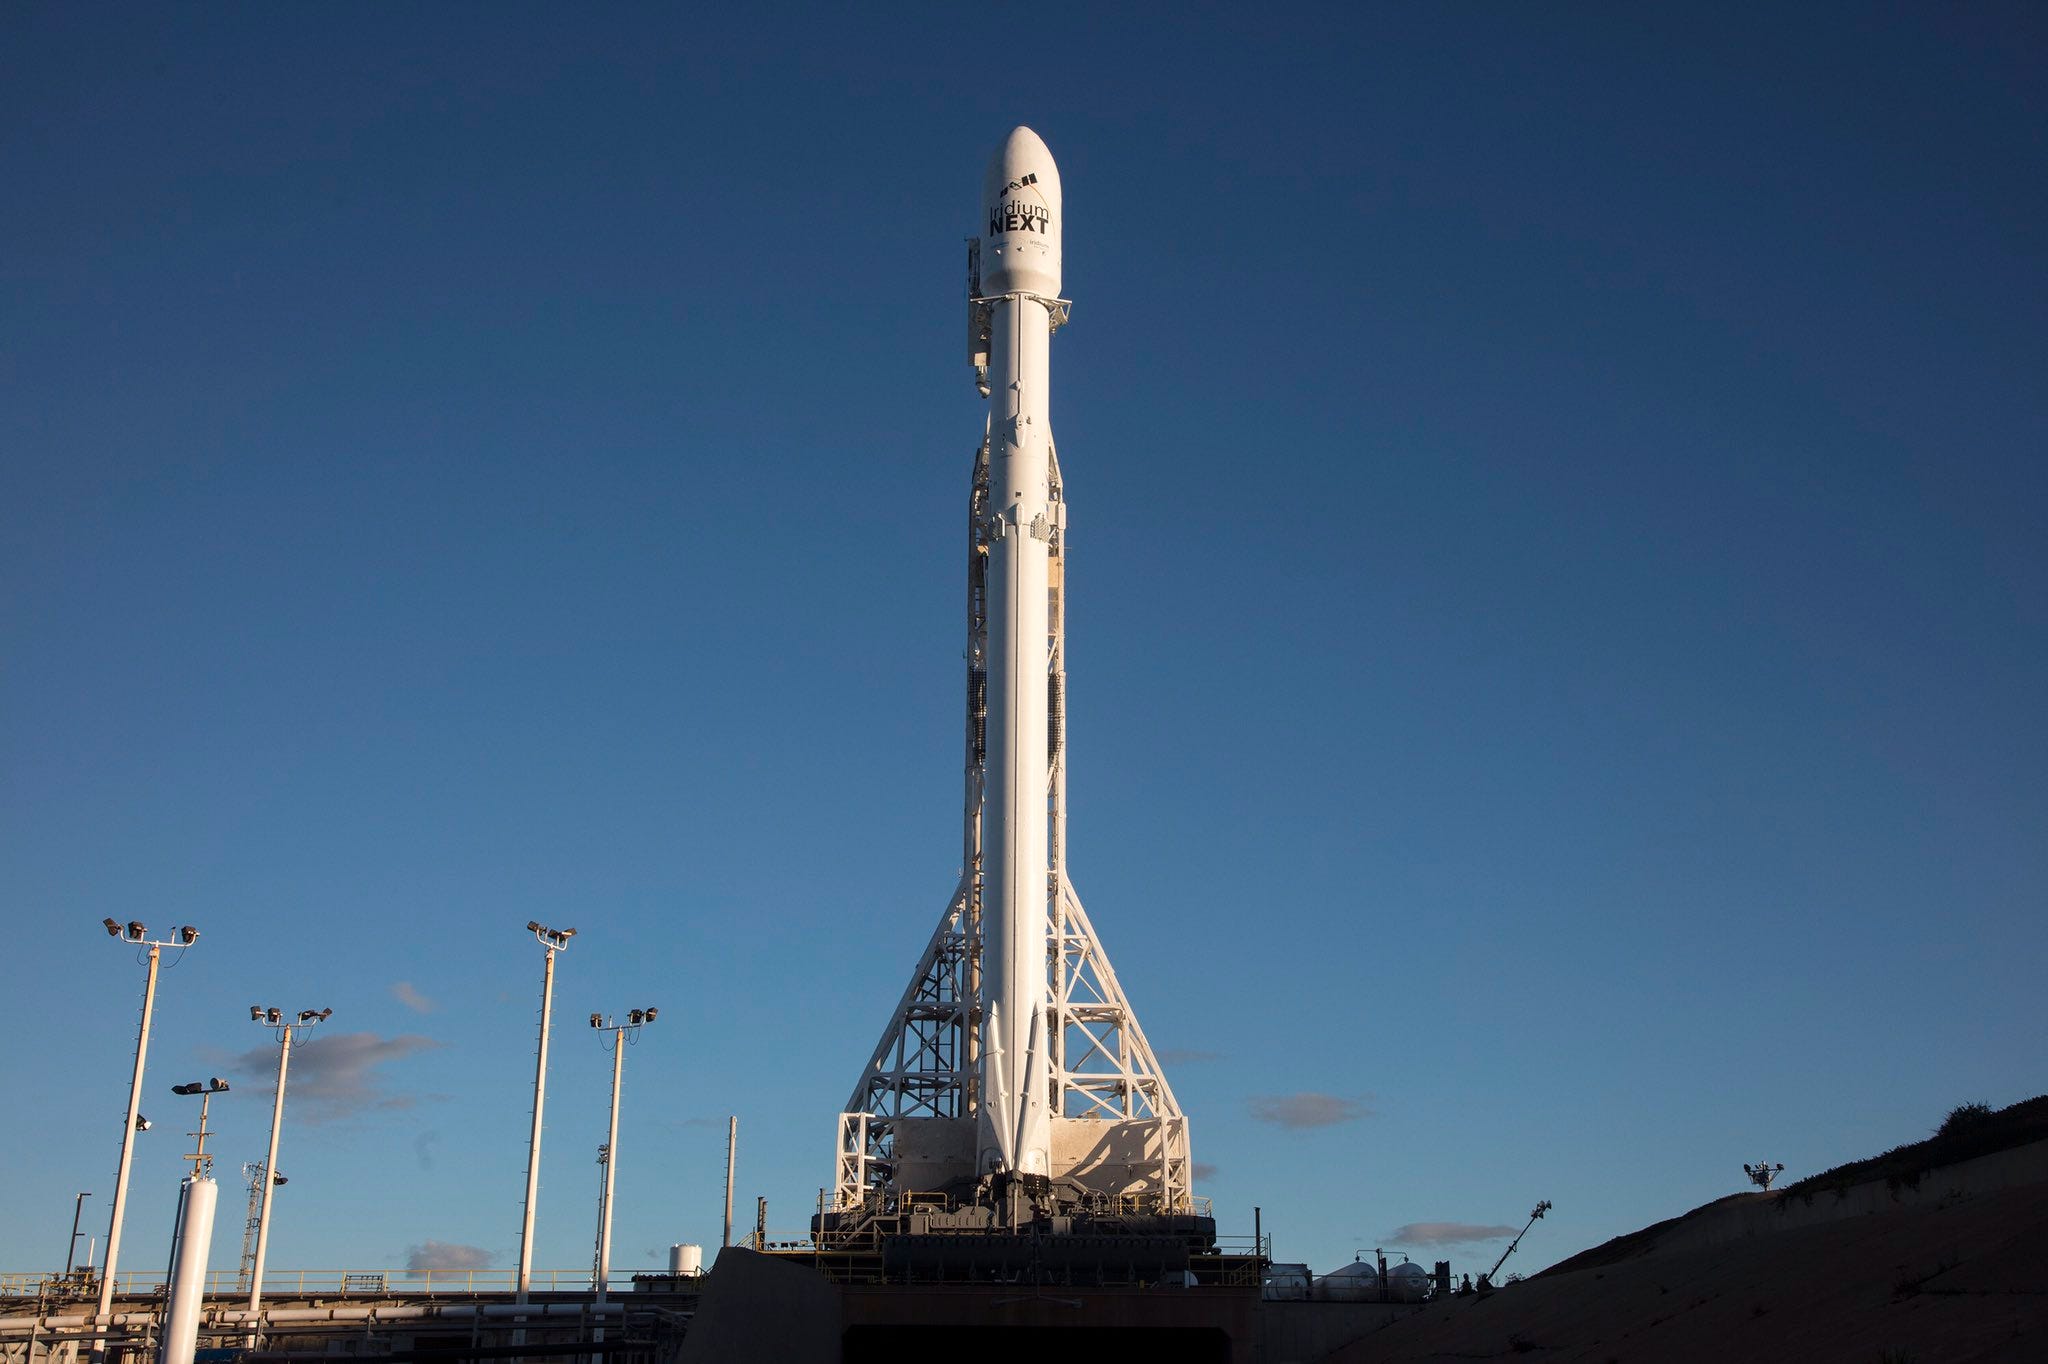 SpaceX Falcon 9 rocket launches, lands in California